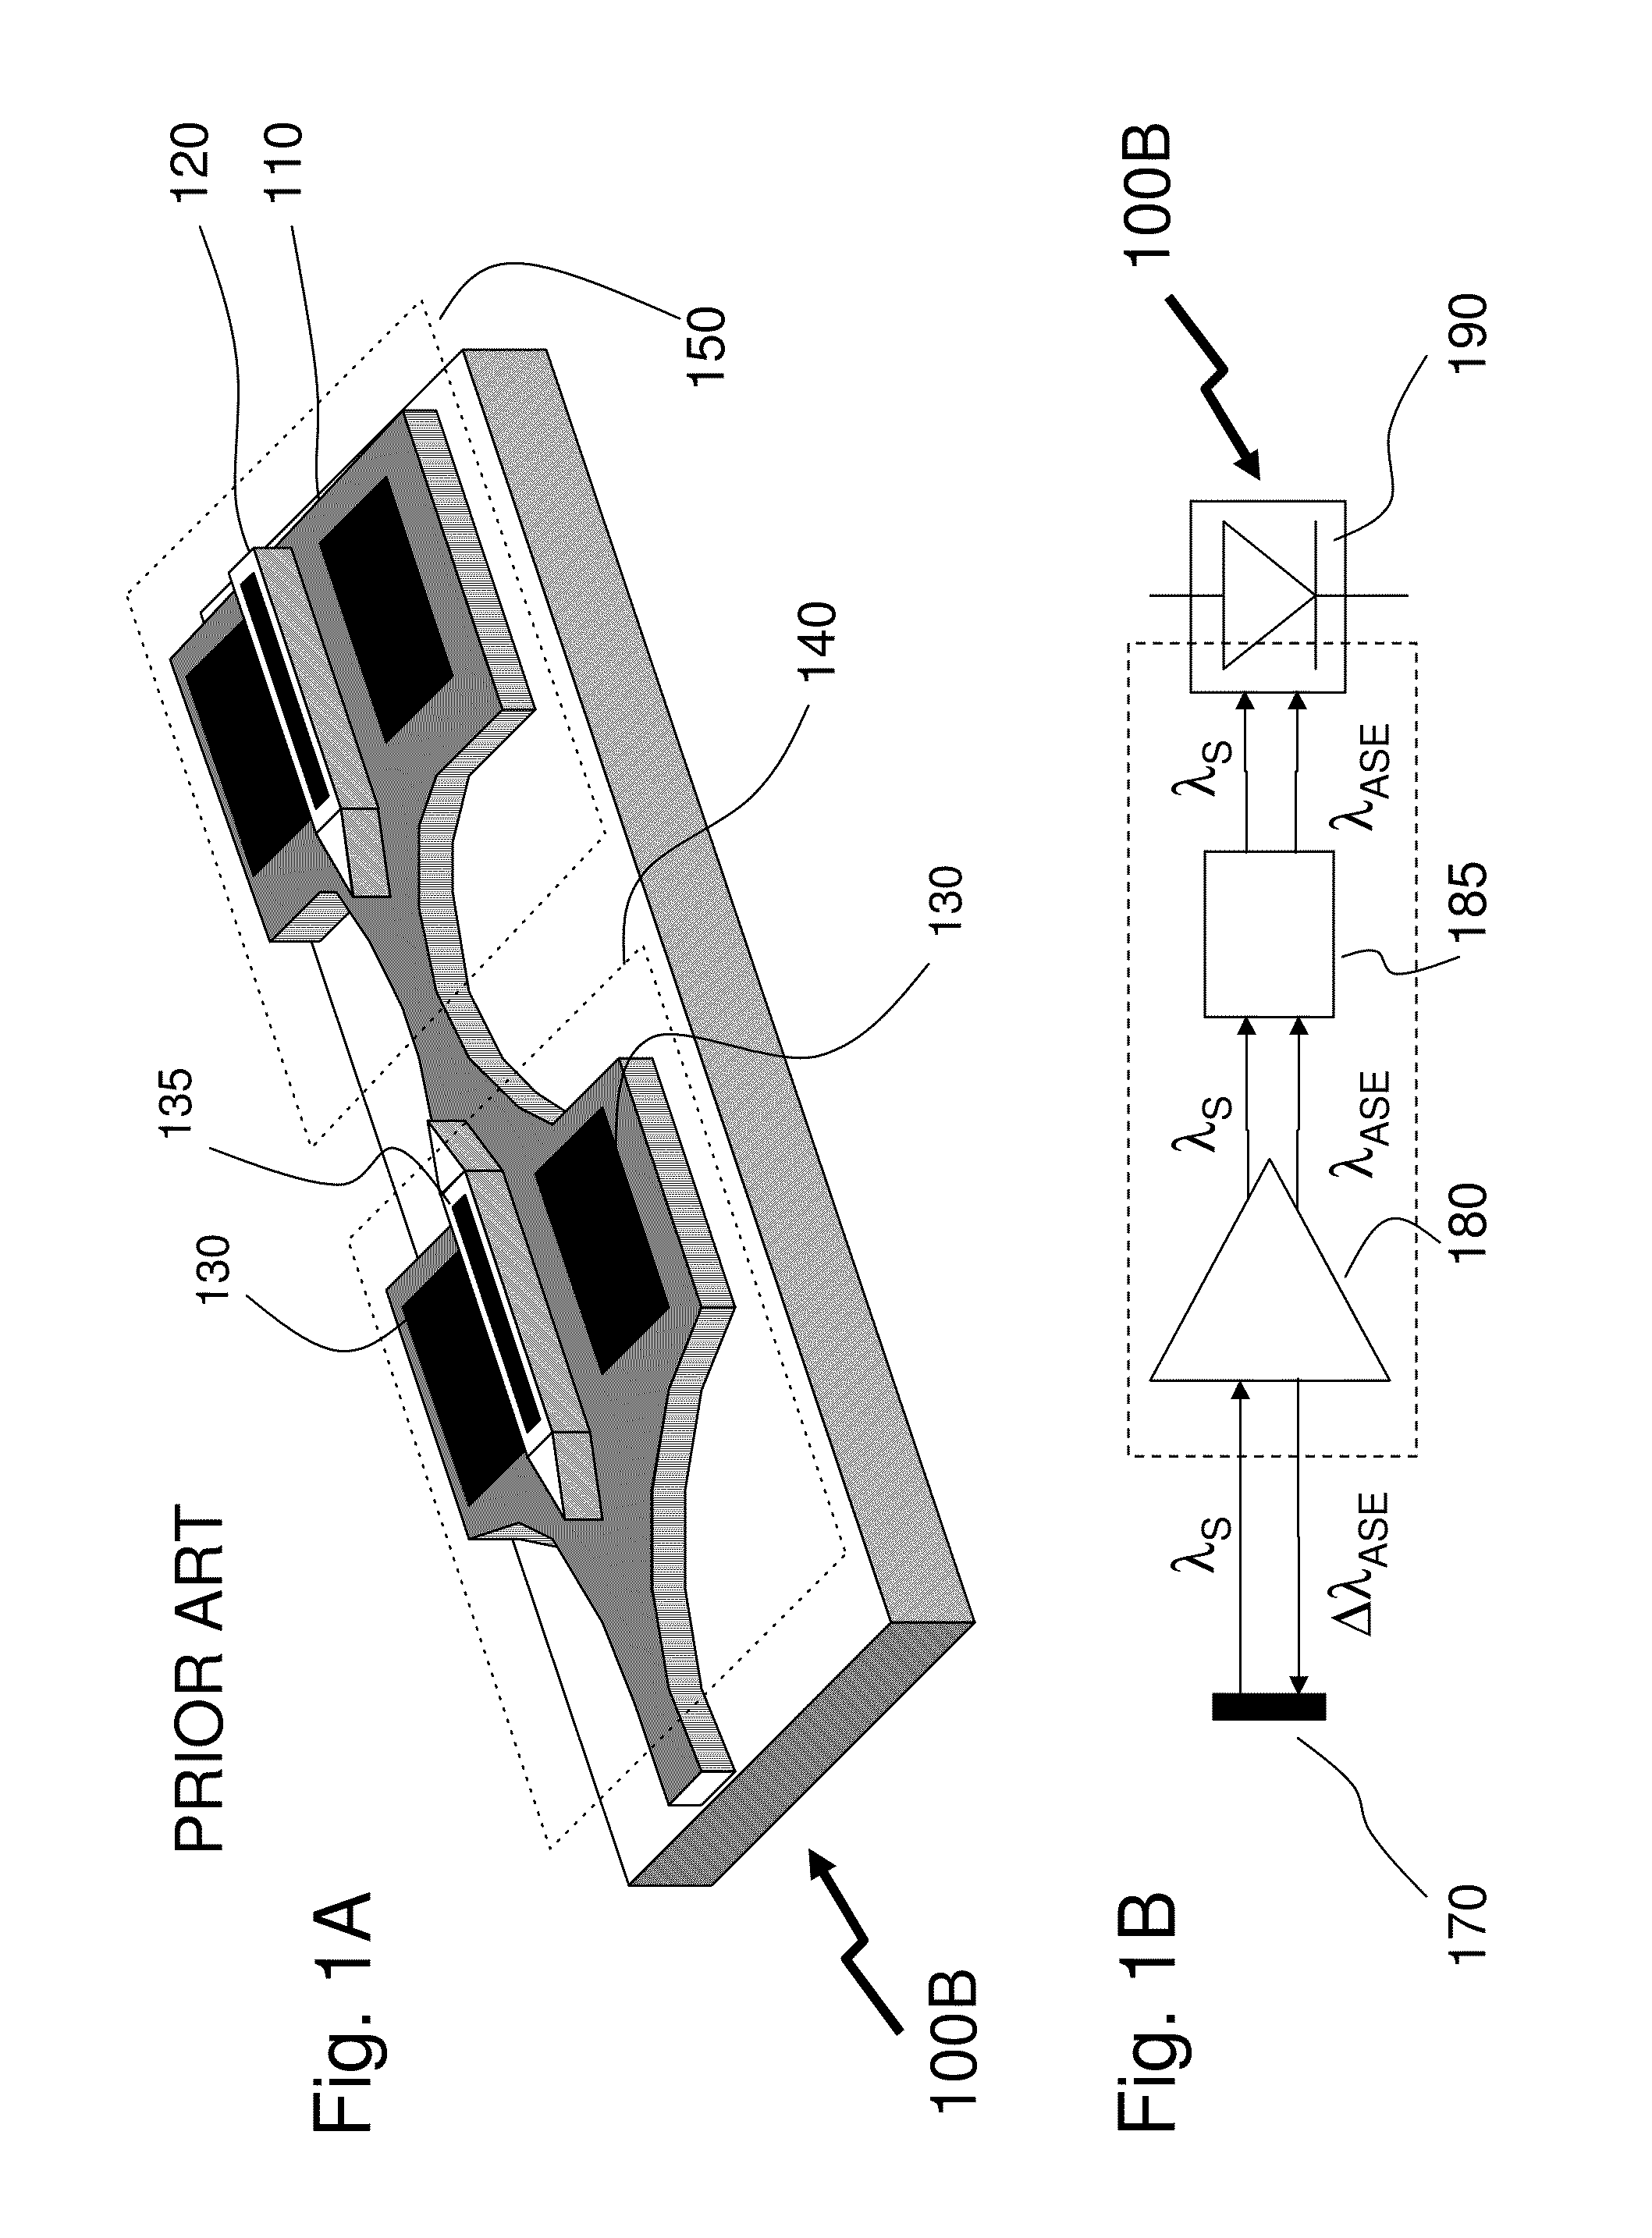 Waveguide Optically Pre-Amplified Detector with Passband Wavelength Filtering